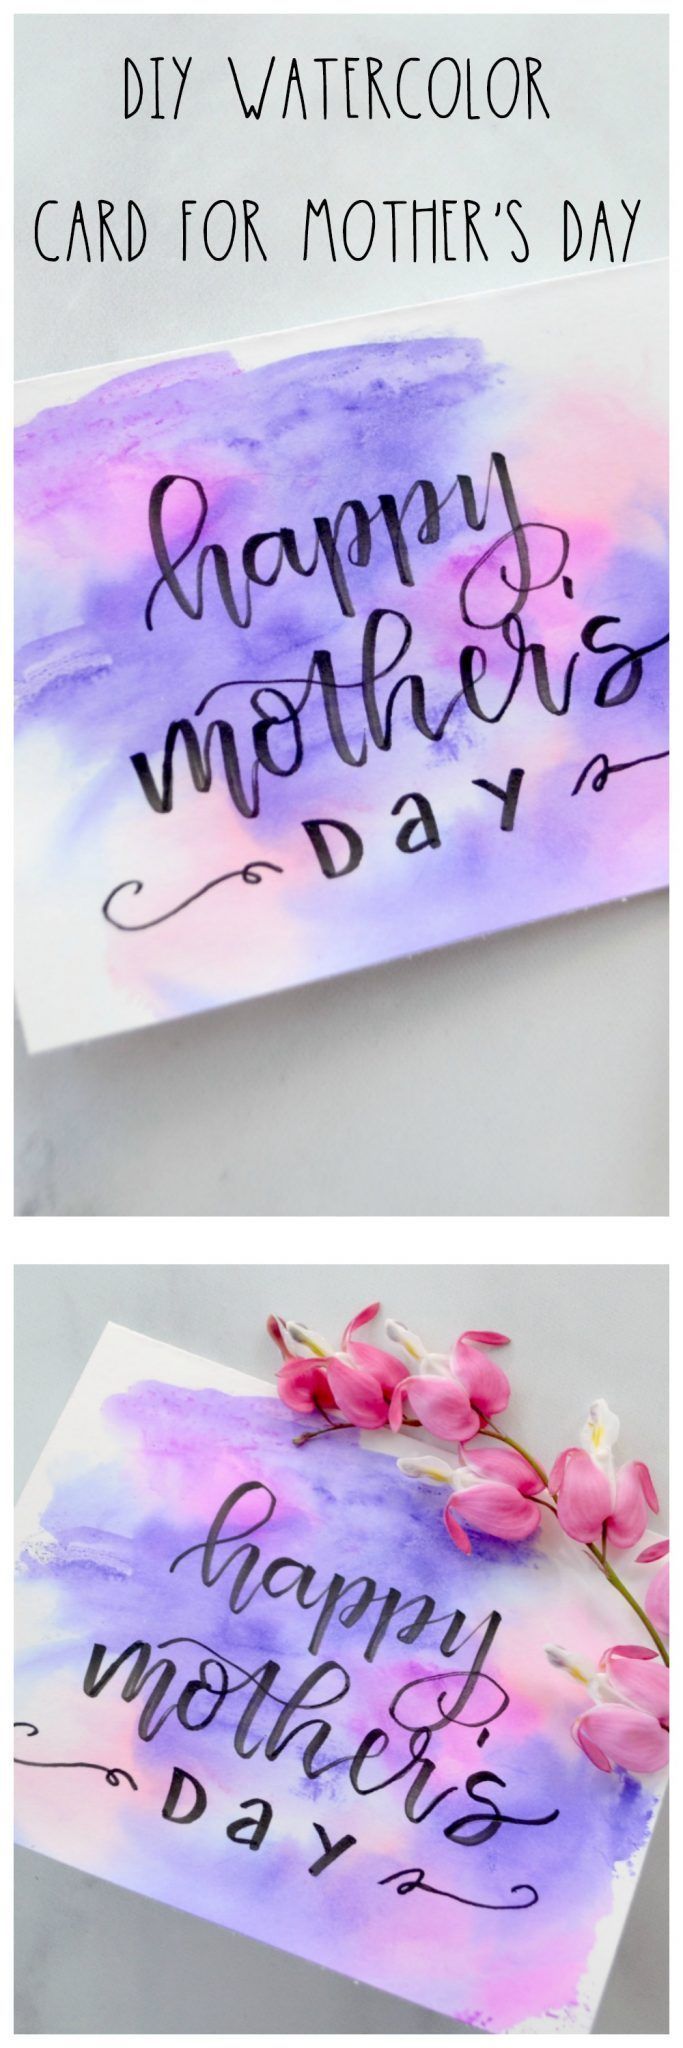 Watercolor Mother’s Day Card